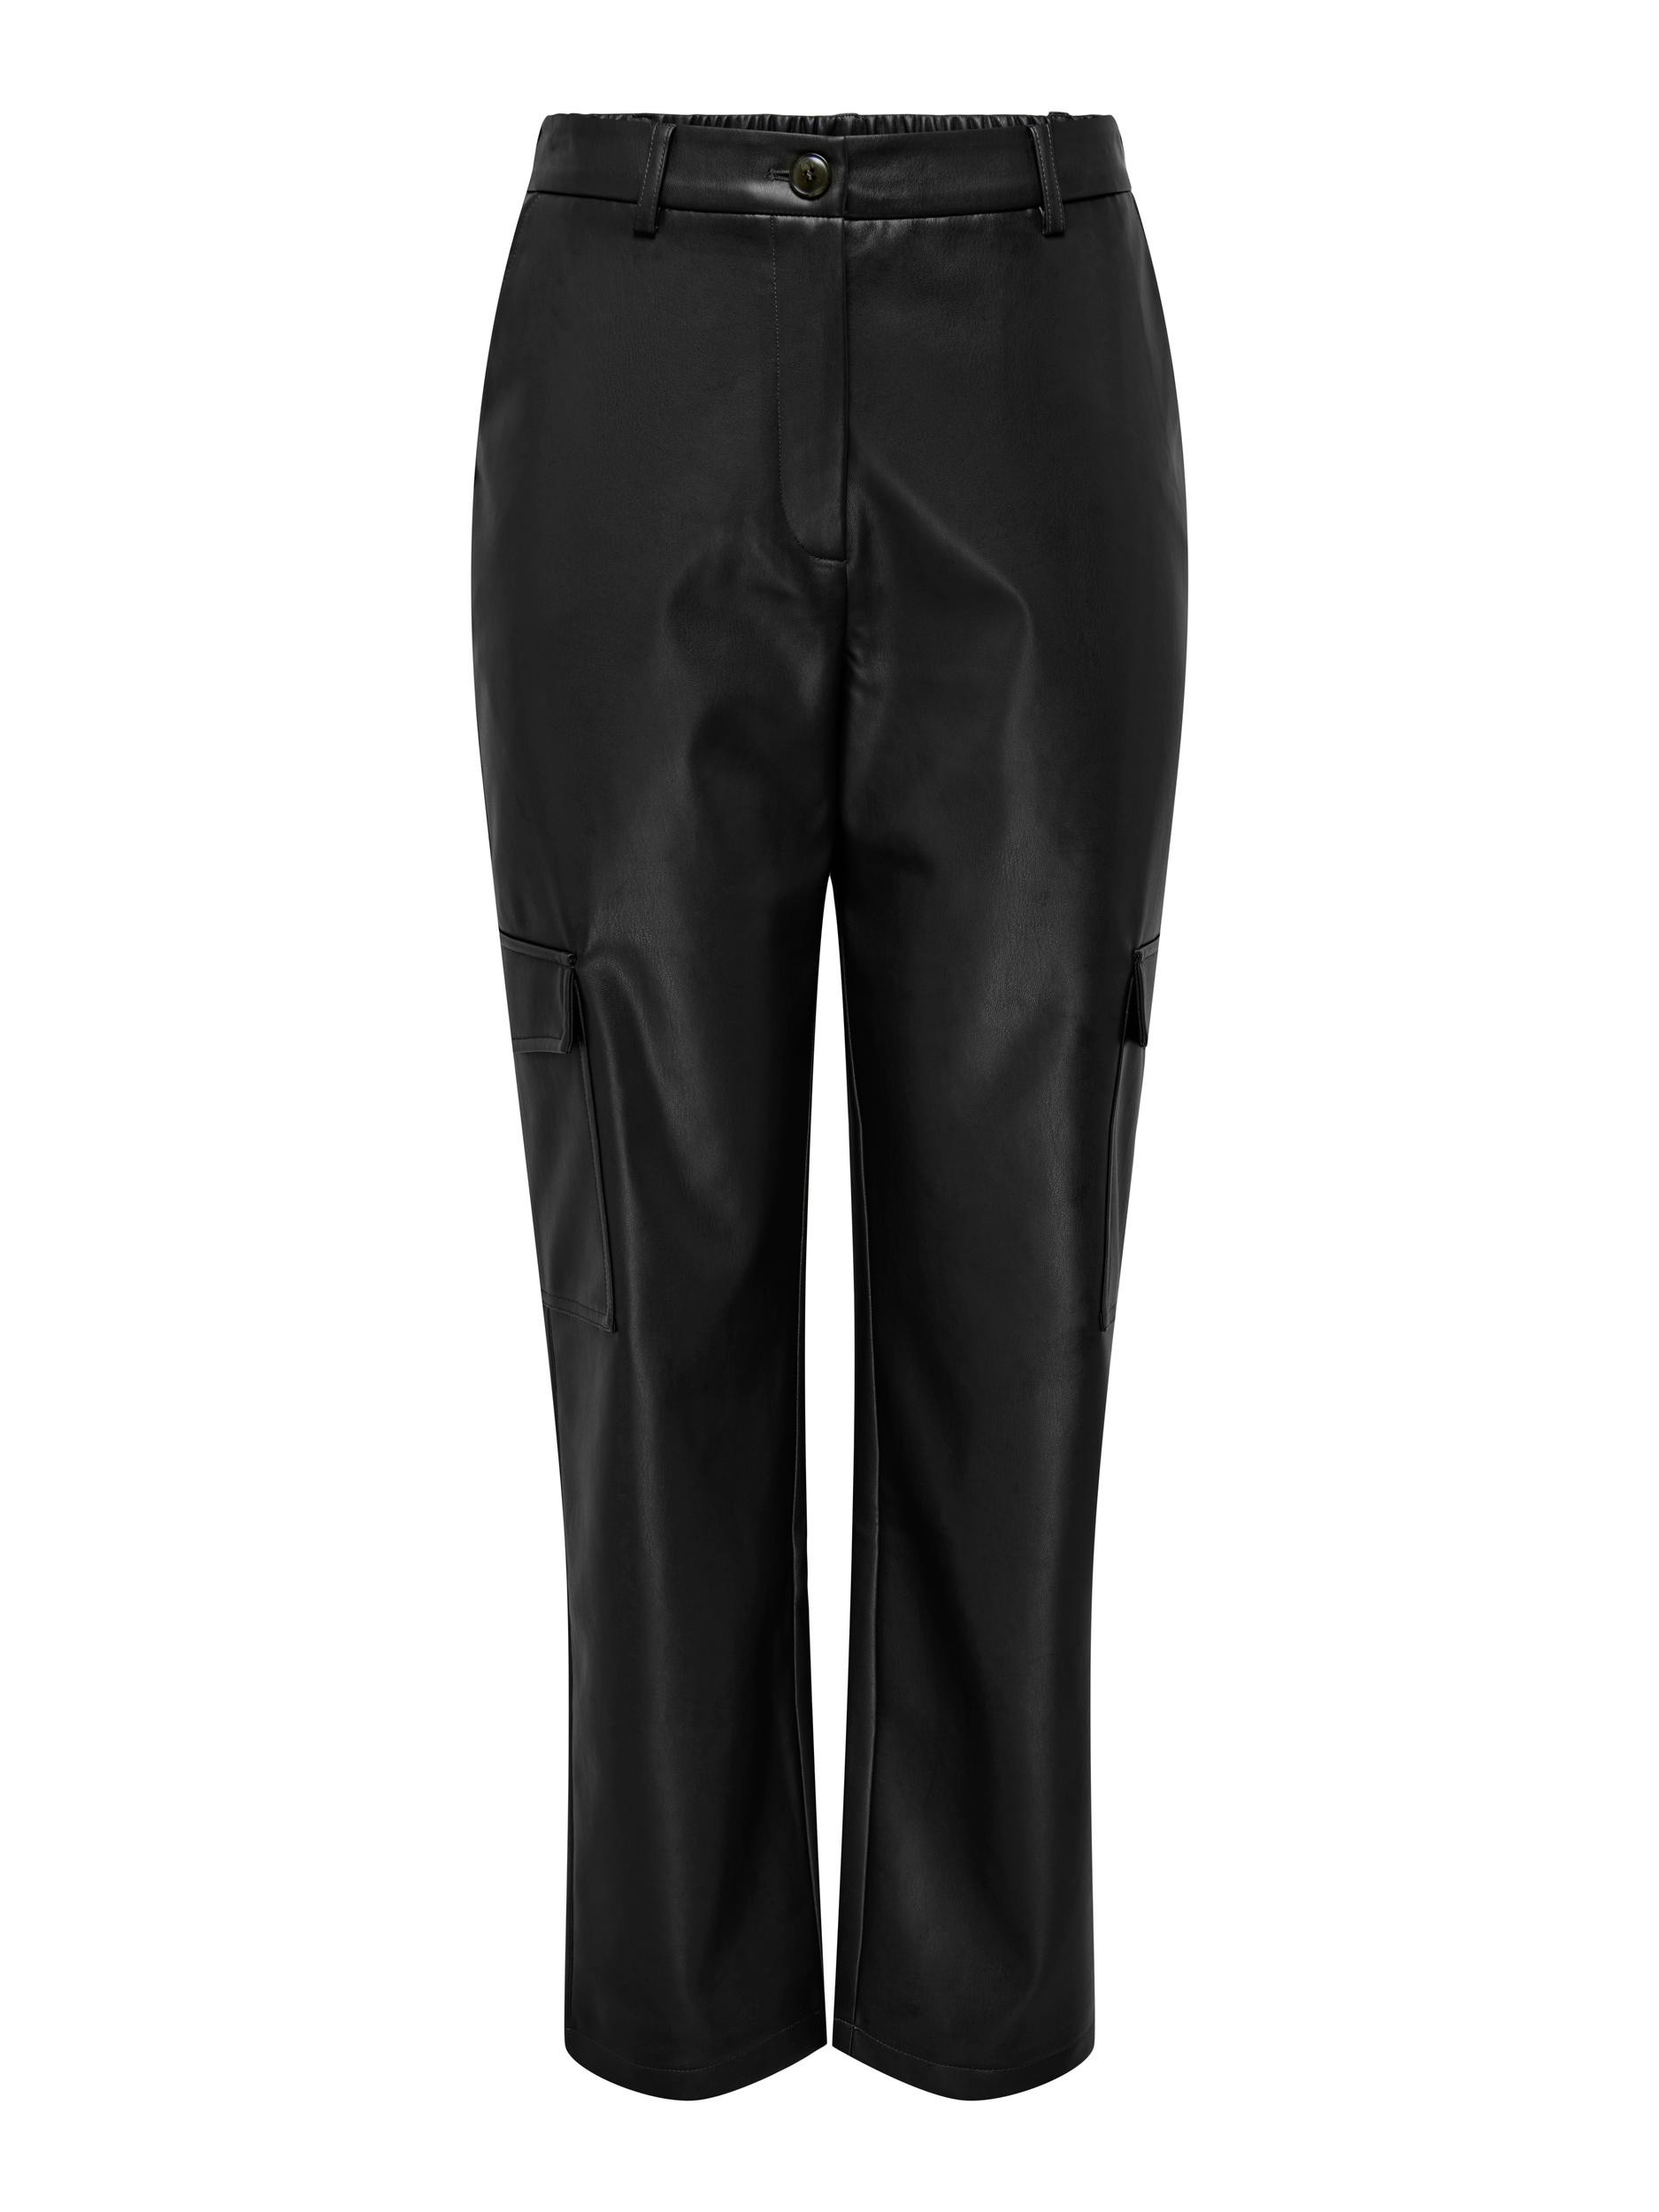 Only - Loose fit cargo trousers, Black, large image number 0